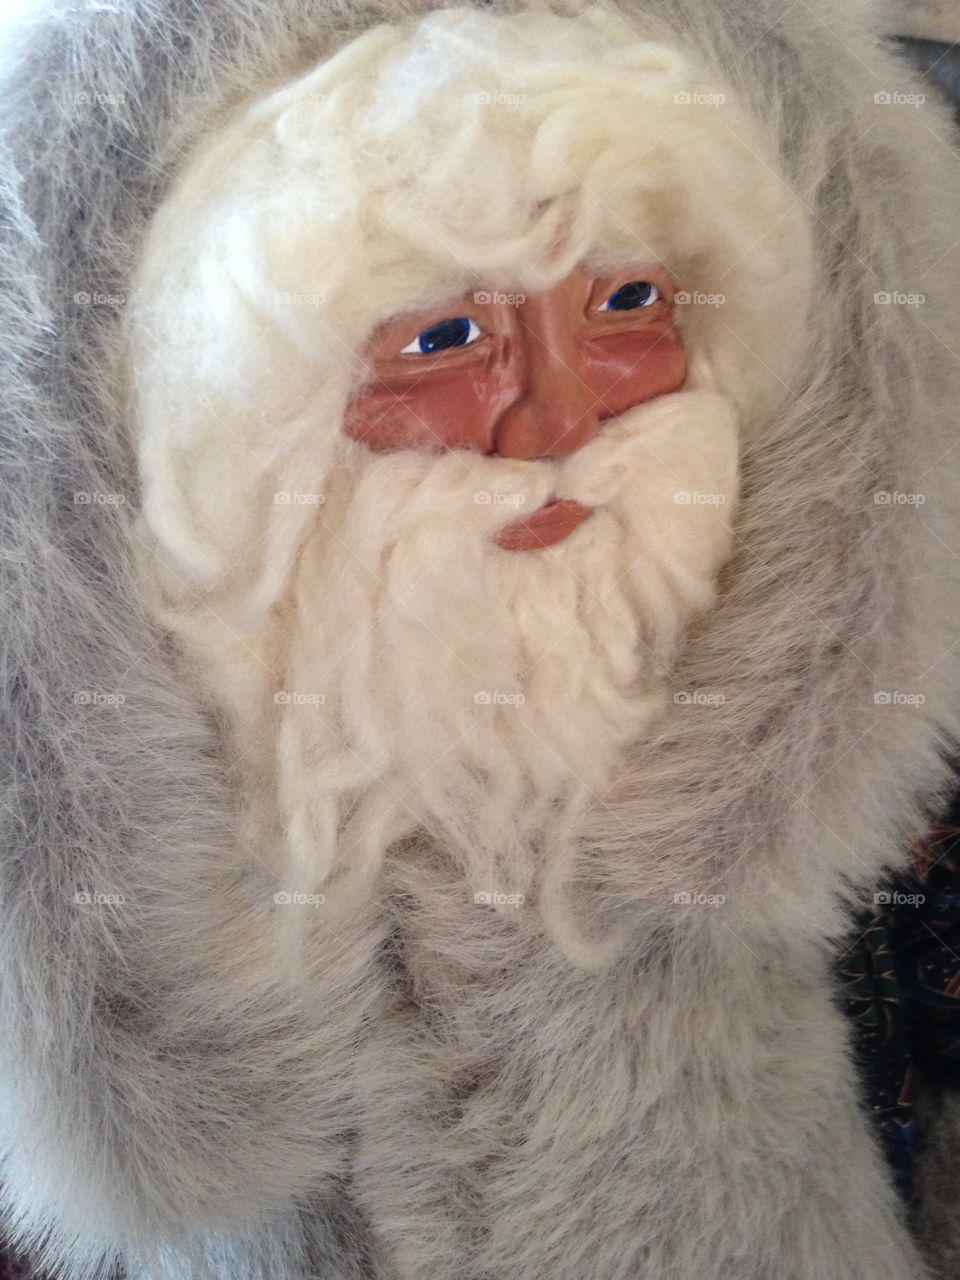 Santa clause wishes you a merry Christmas.